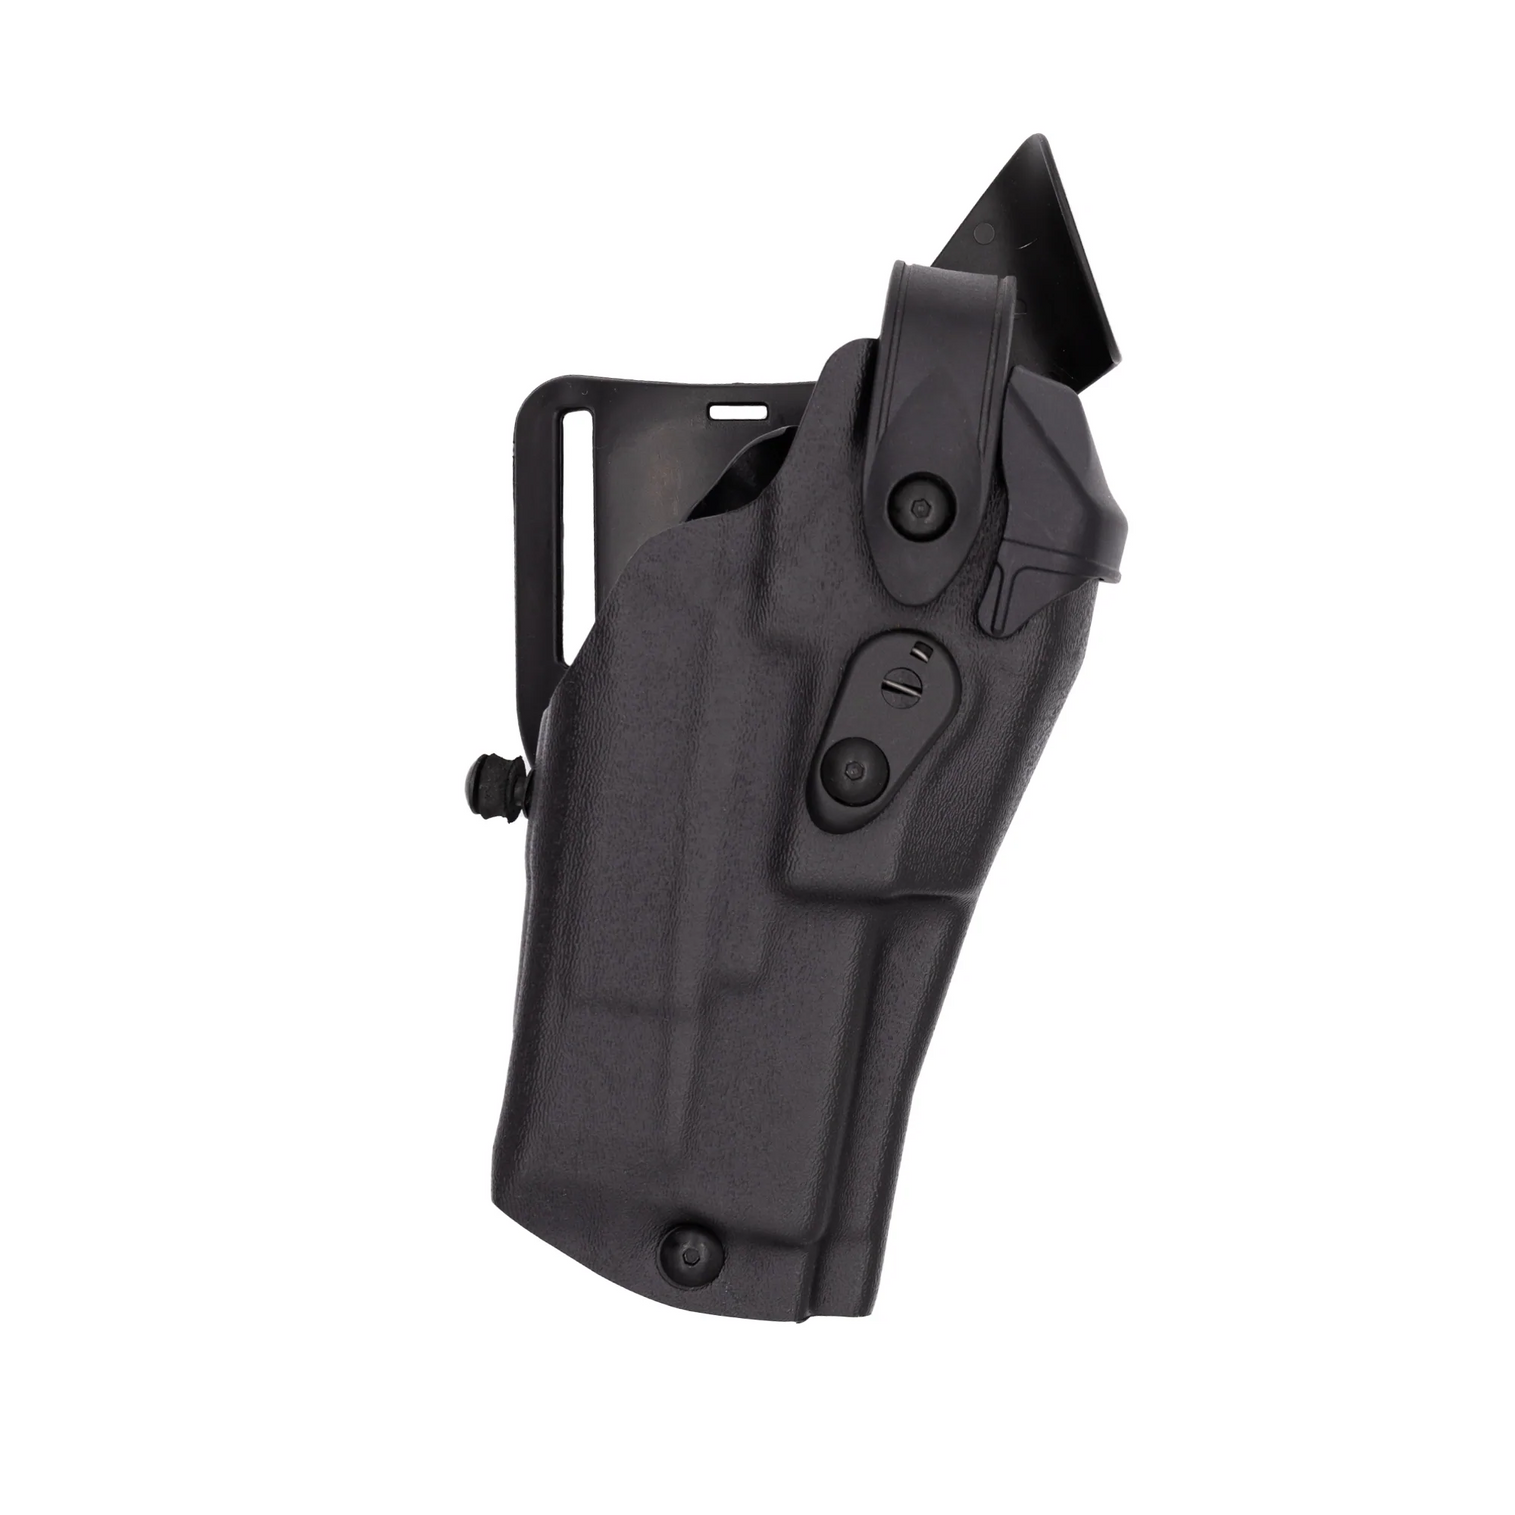 Model 6360rds Als/sls Mid-ride, Level Iii Retention Duty Holster For Sig Sauer P320 9c W/ Light - KR6360RDS-7502-411